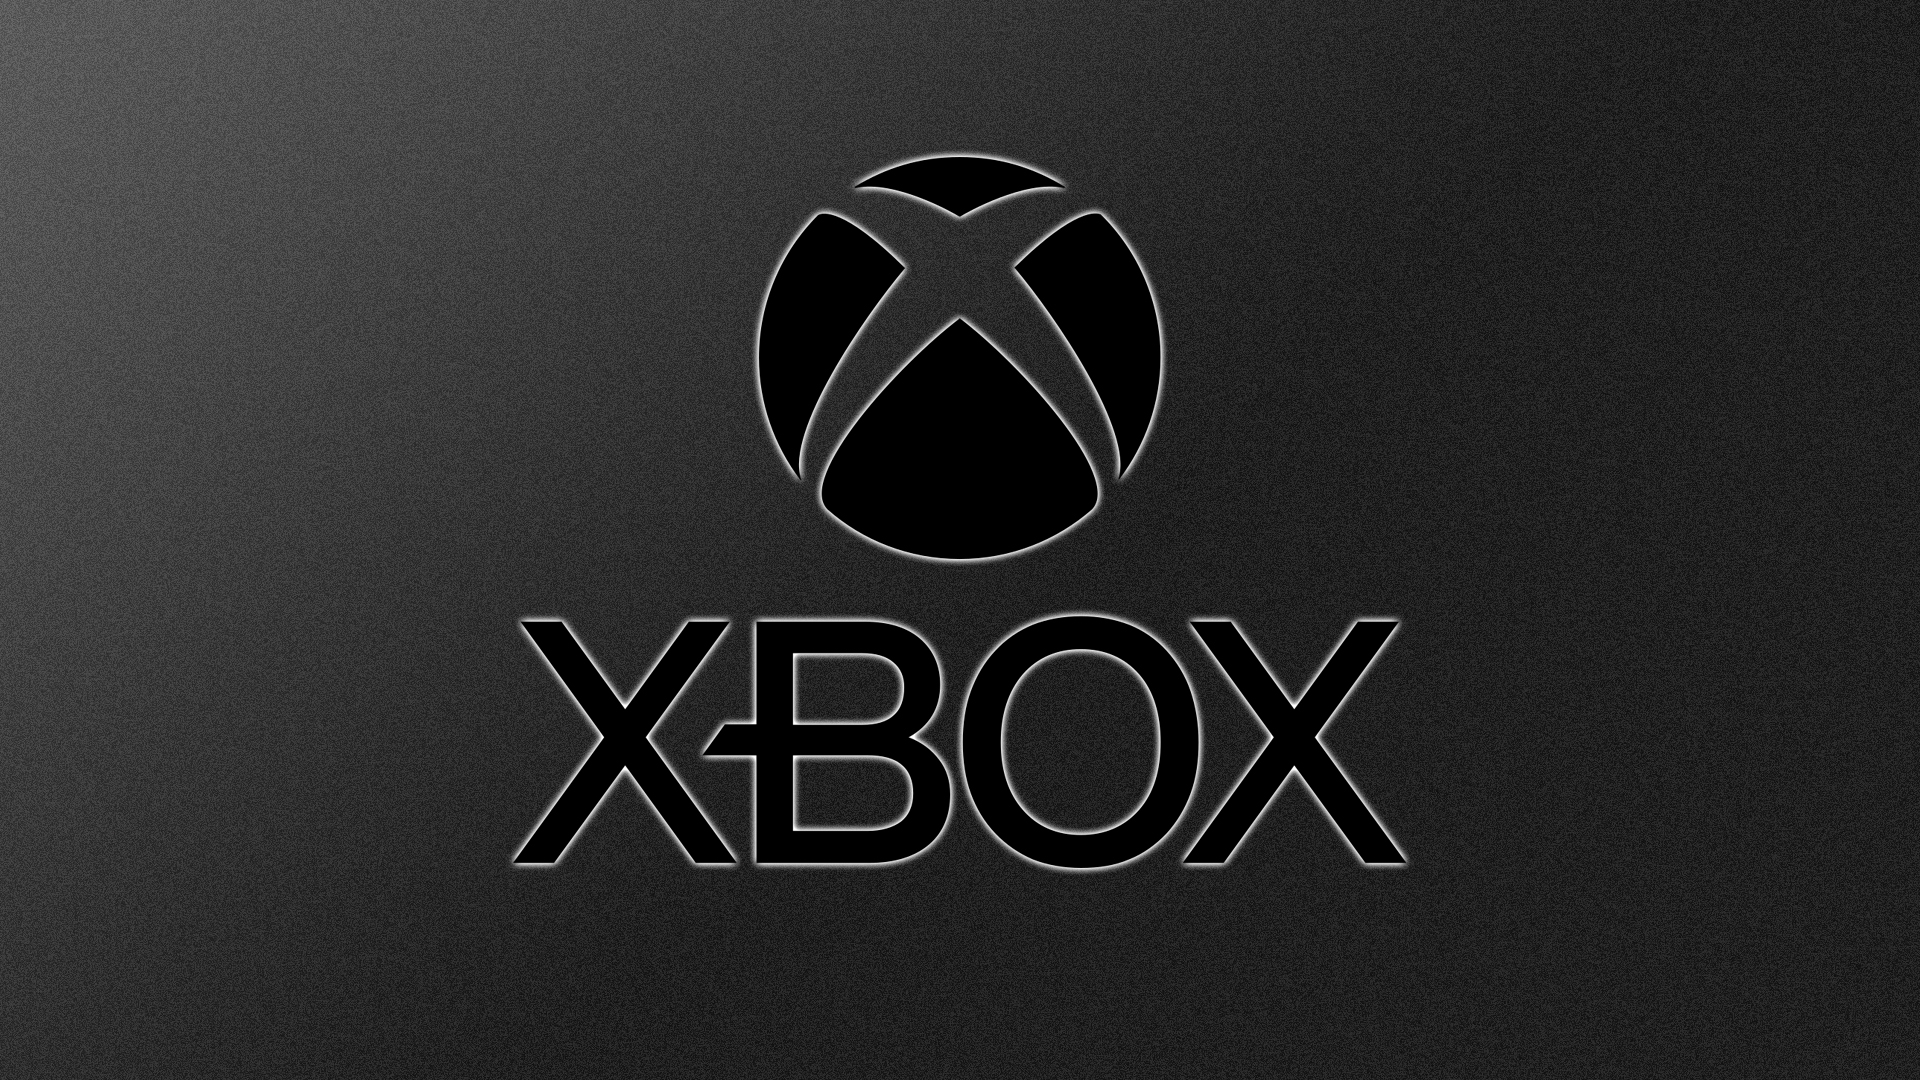 xbox live becoming free